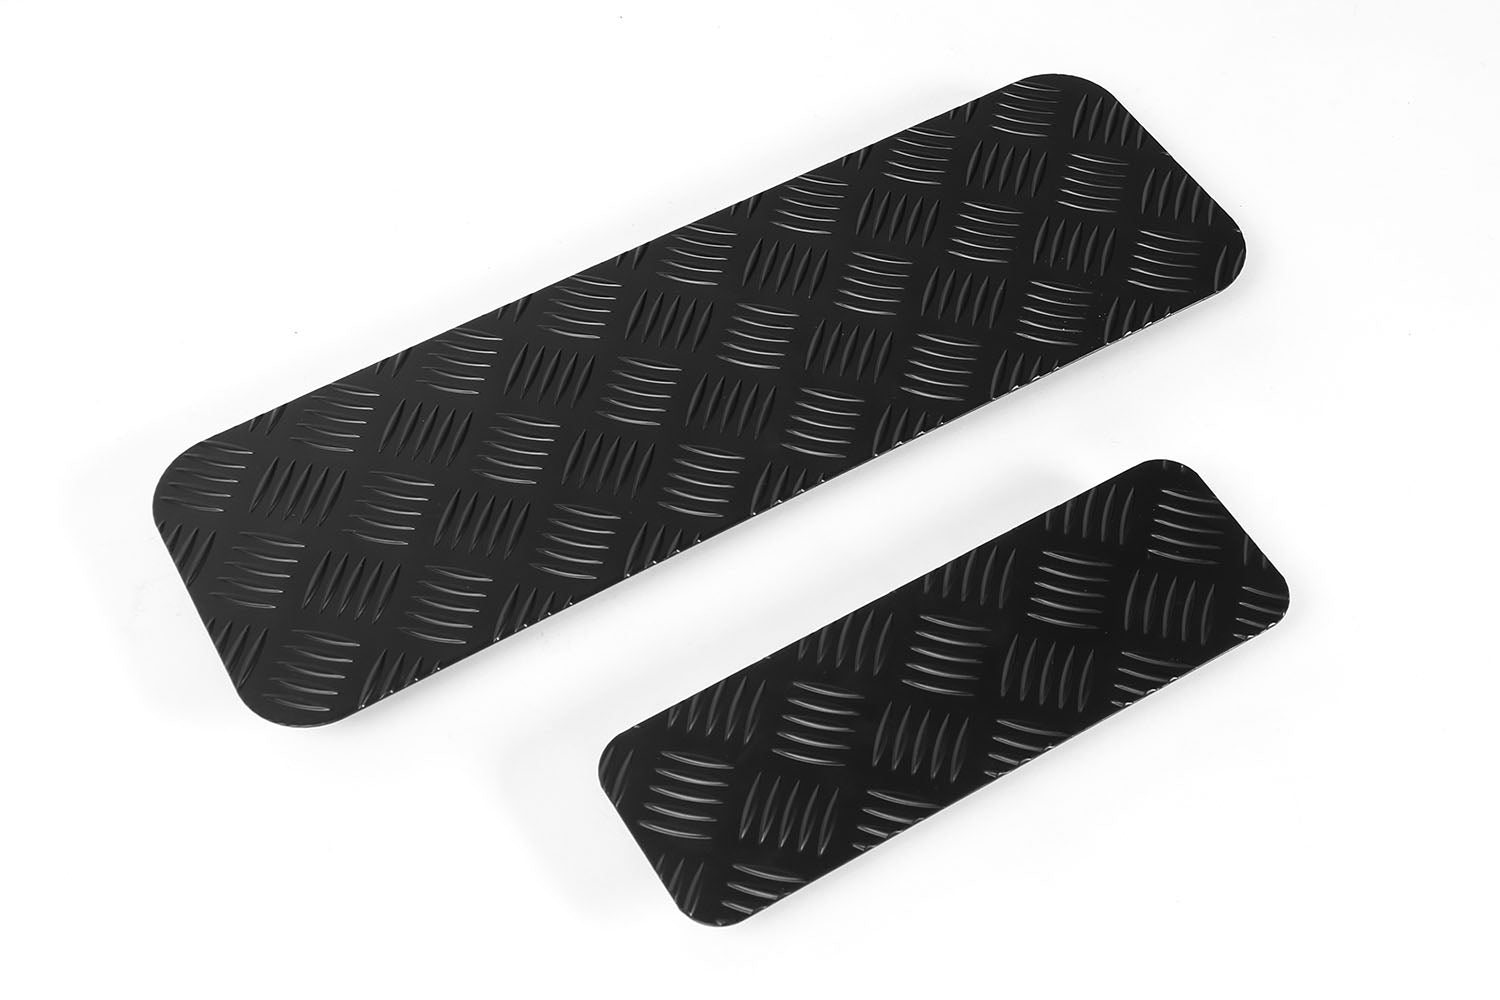 NEW Defender, Rear Door Spare Wheel Bracket Covers (Aluminum) - for Land Rover [L663 from Model Year 2020+]